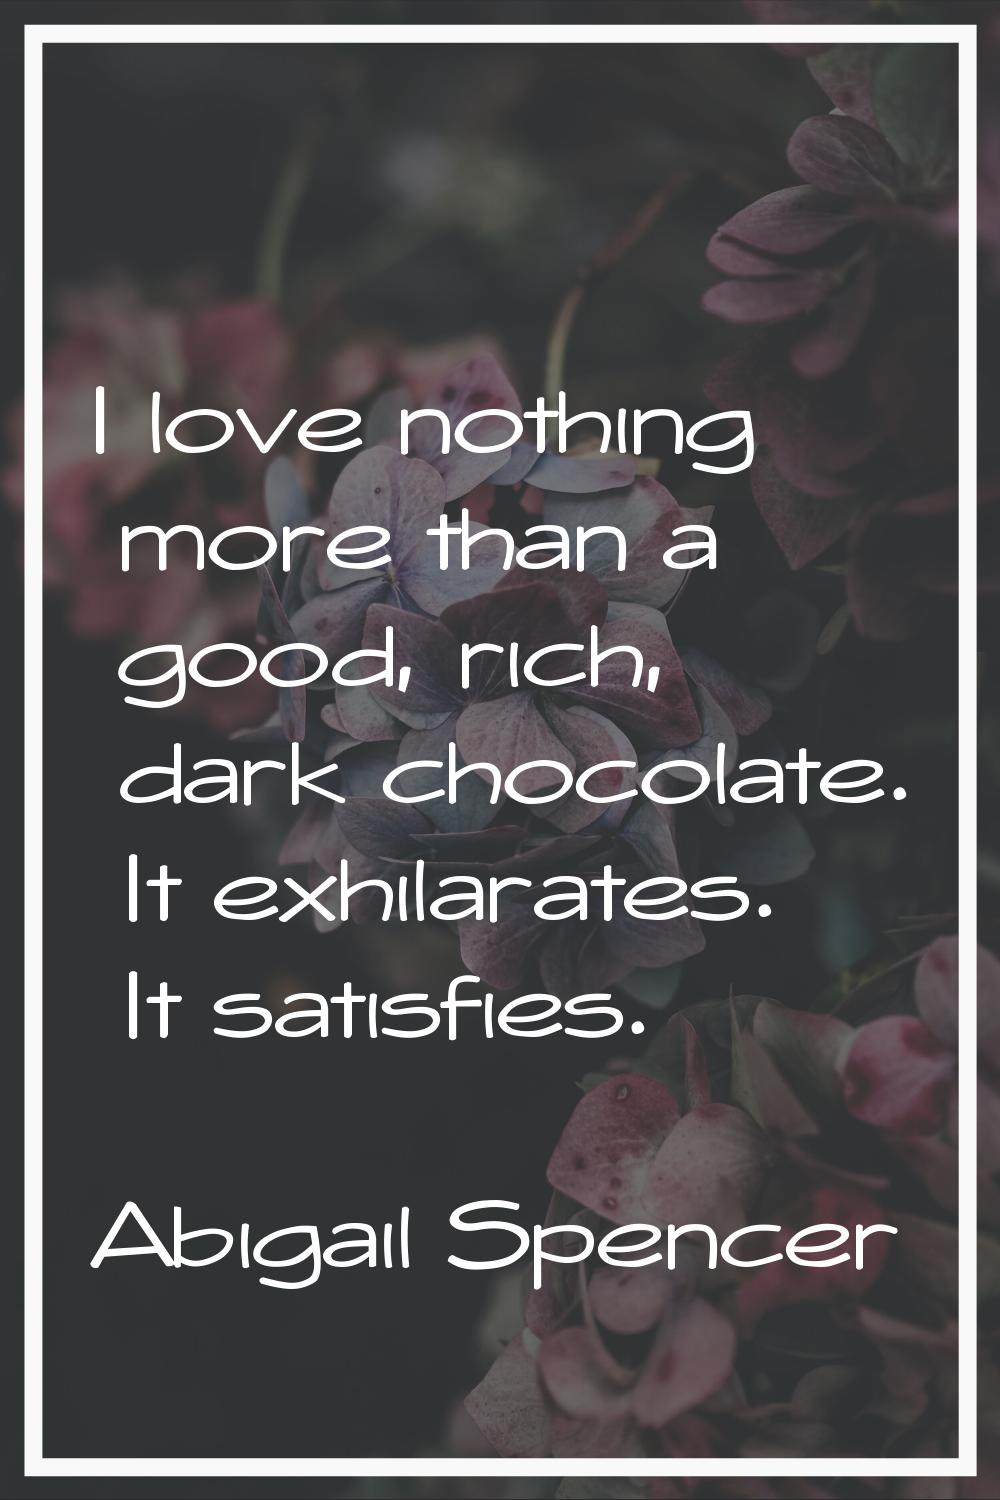 I love nothing more than a good, rich, dark chocolate. It exhilarates. It satisfies.